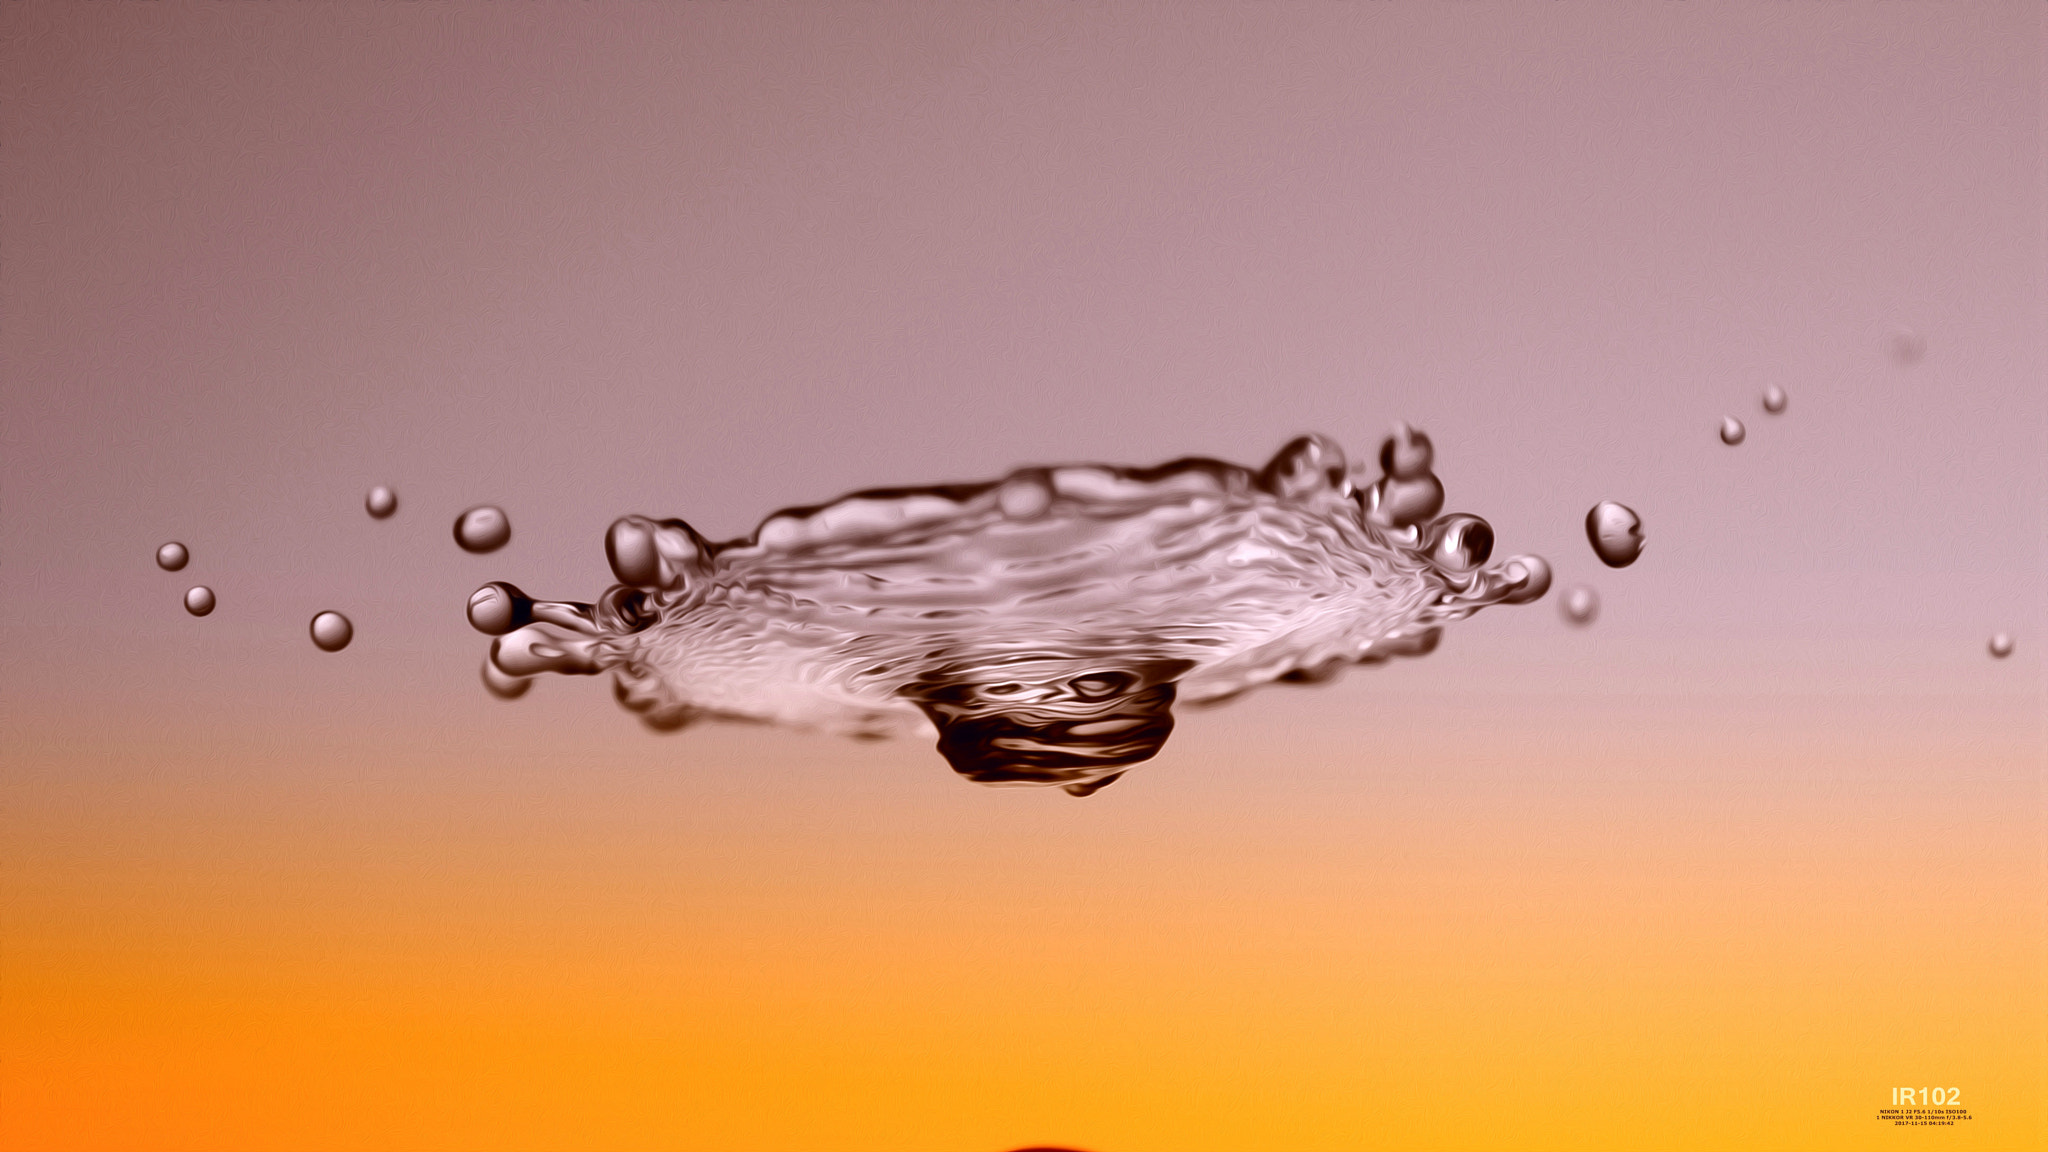 Nikon 1 J2 sample photo. Drops and ripples in water photography